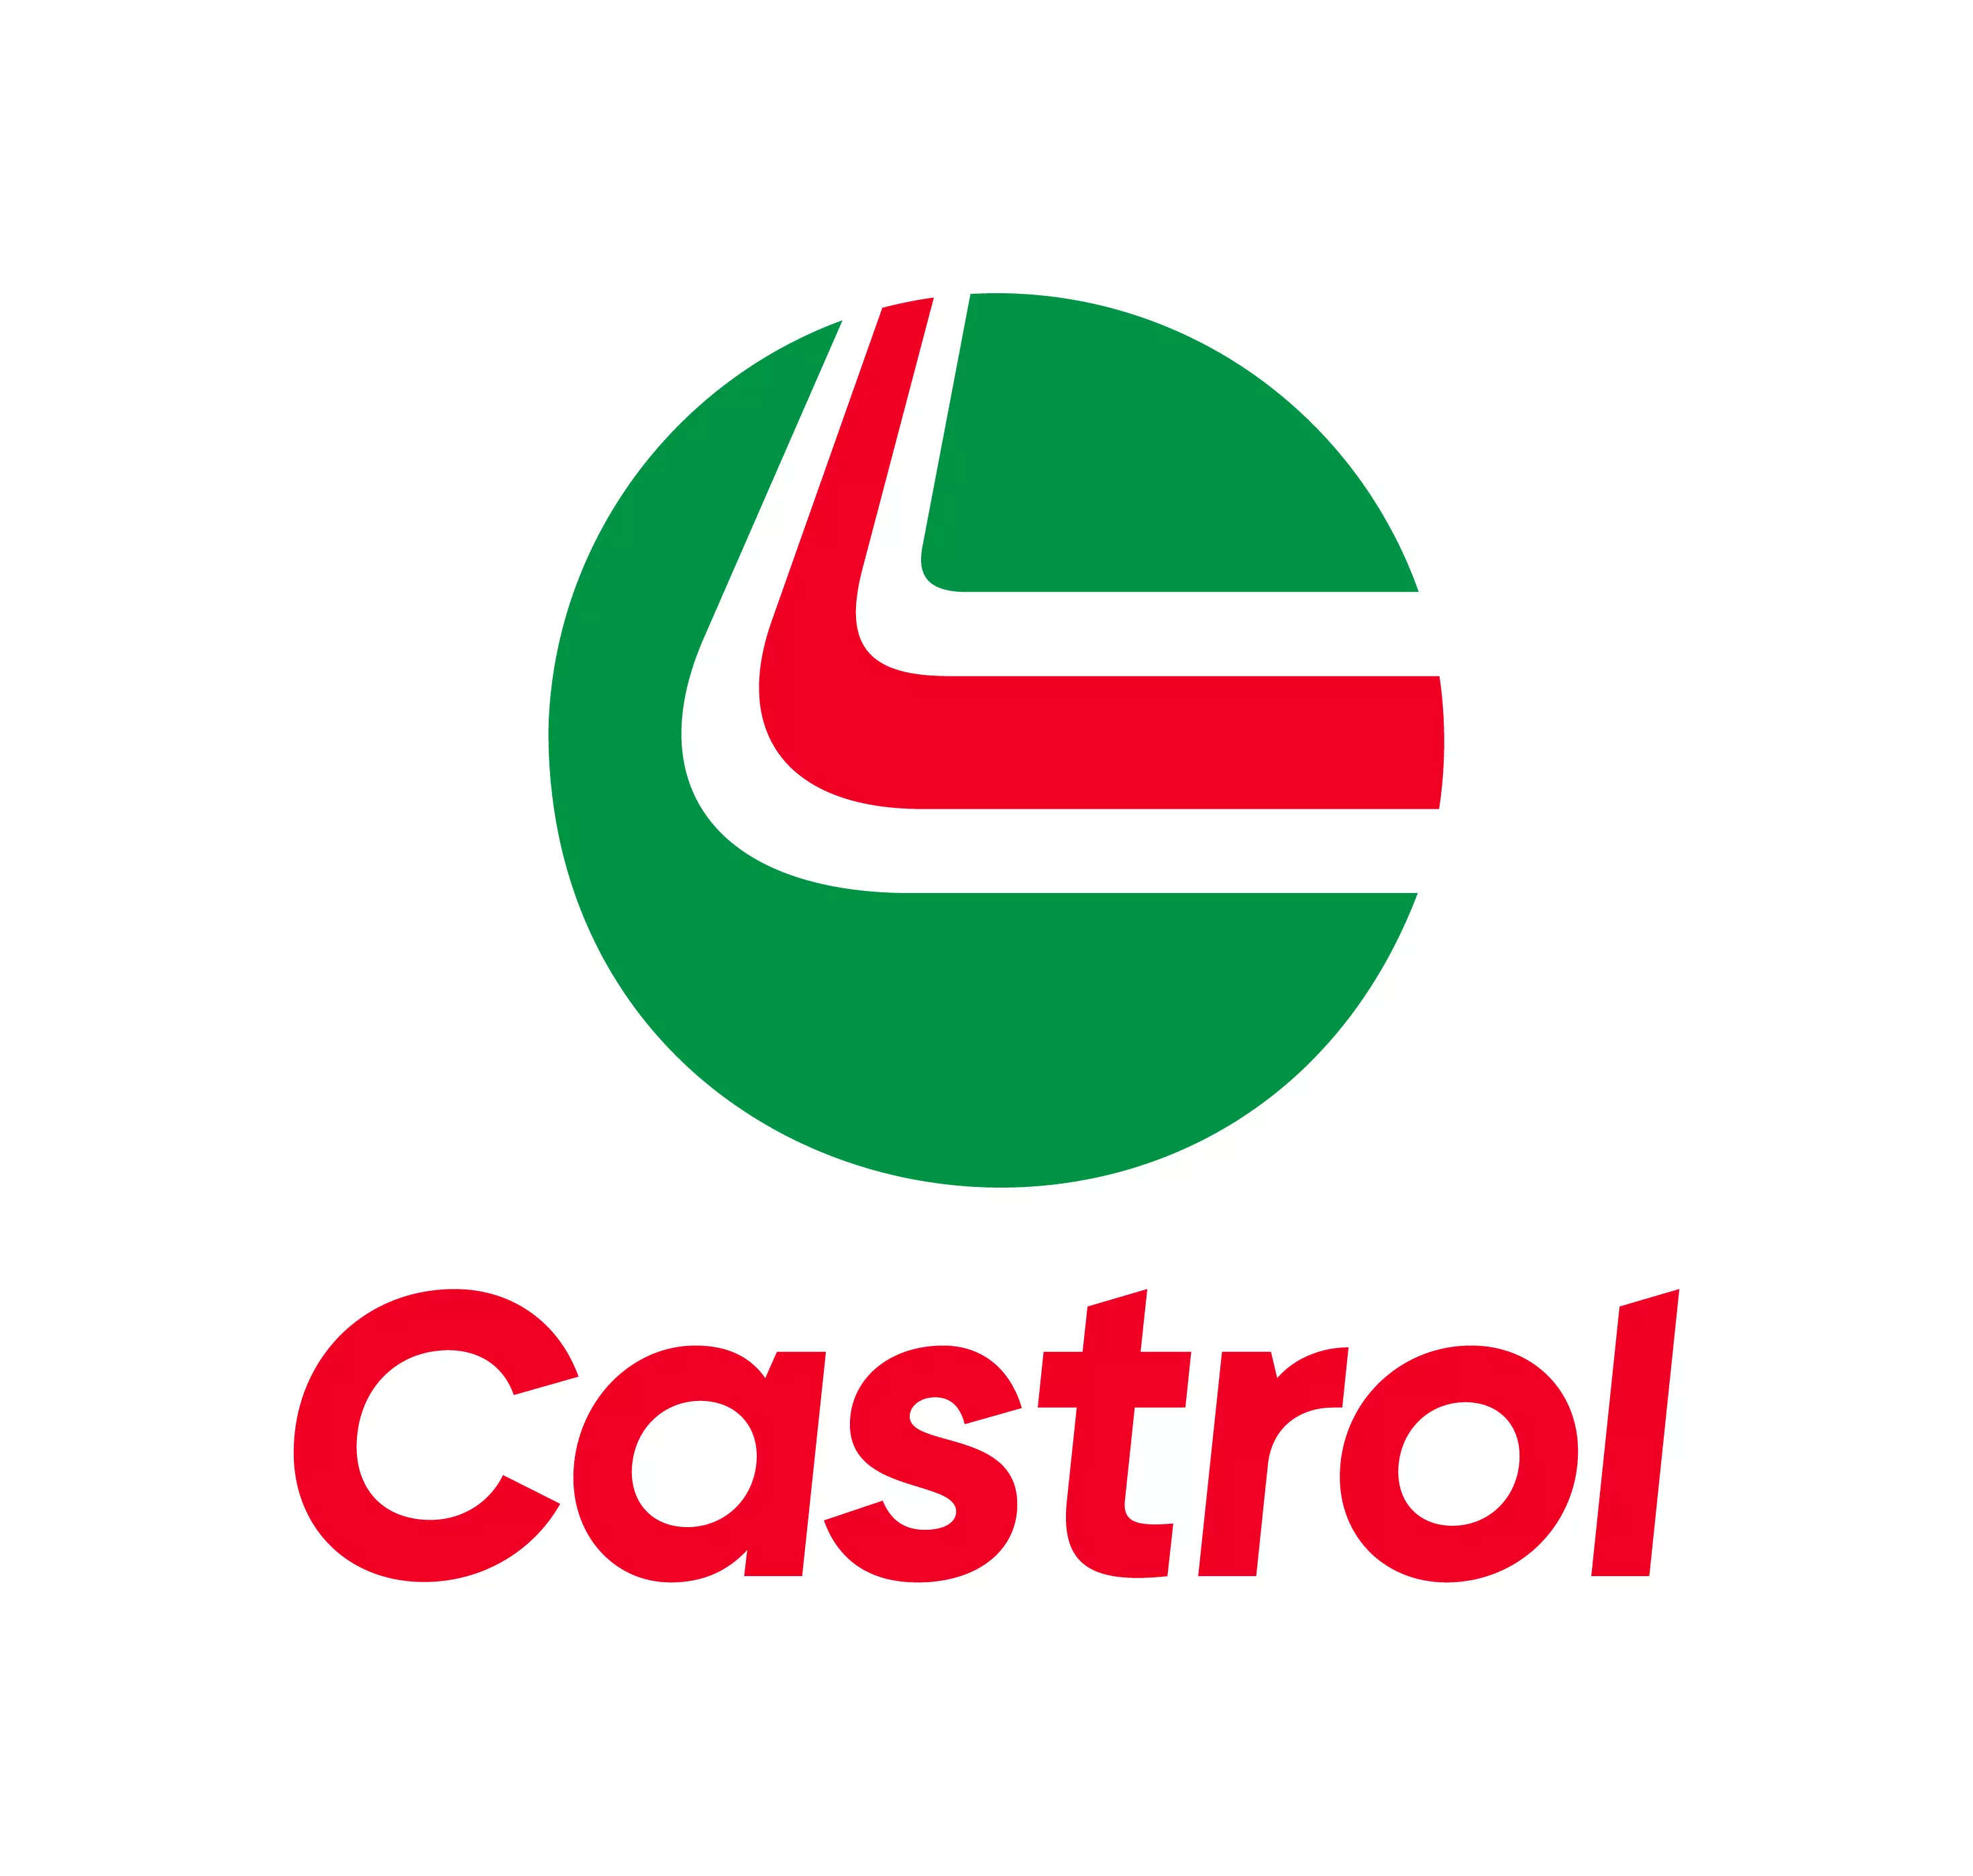 castrol-oil-wreath-style-waterslide-transfer-decal-1958-1968-and-1968-2002-lupon-gov-ph